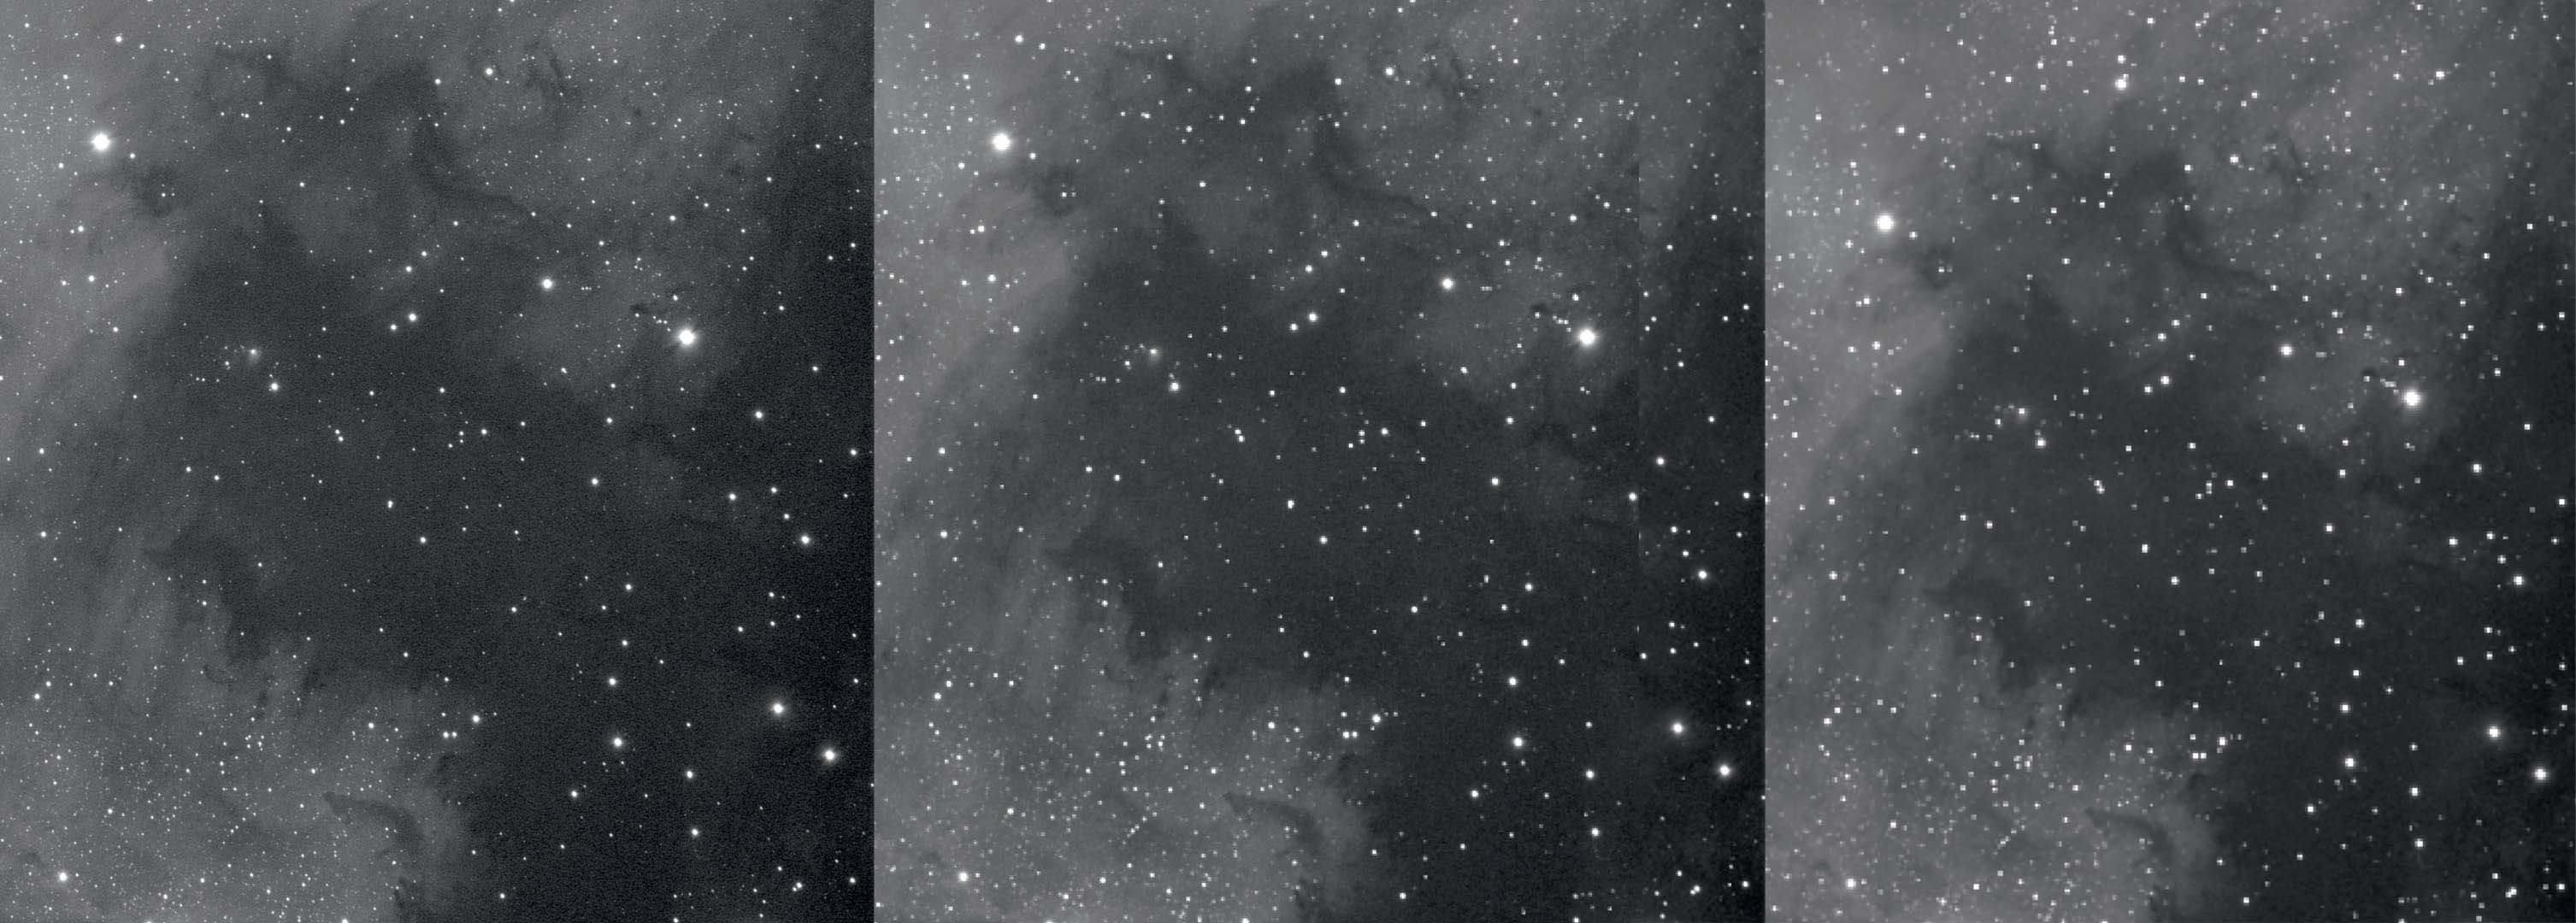 A section of the North America Nebula without binning, with 2x2 and with 3x3 binning (from left to right). Binning reduces resolution and improves signal-to-noise ratio. M.Weigand